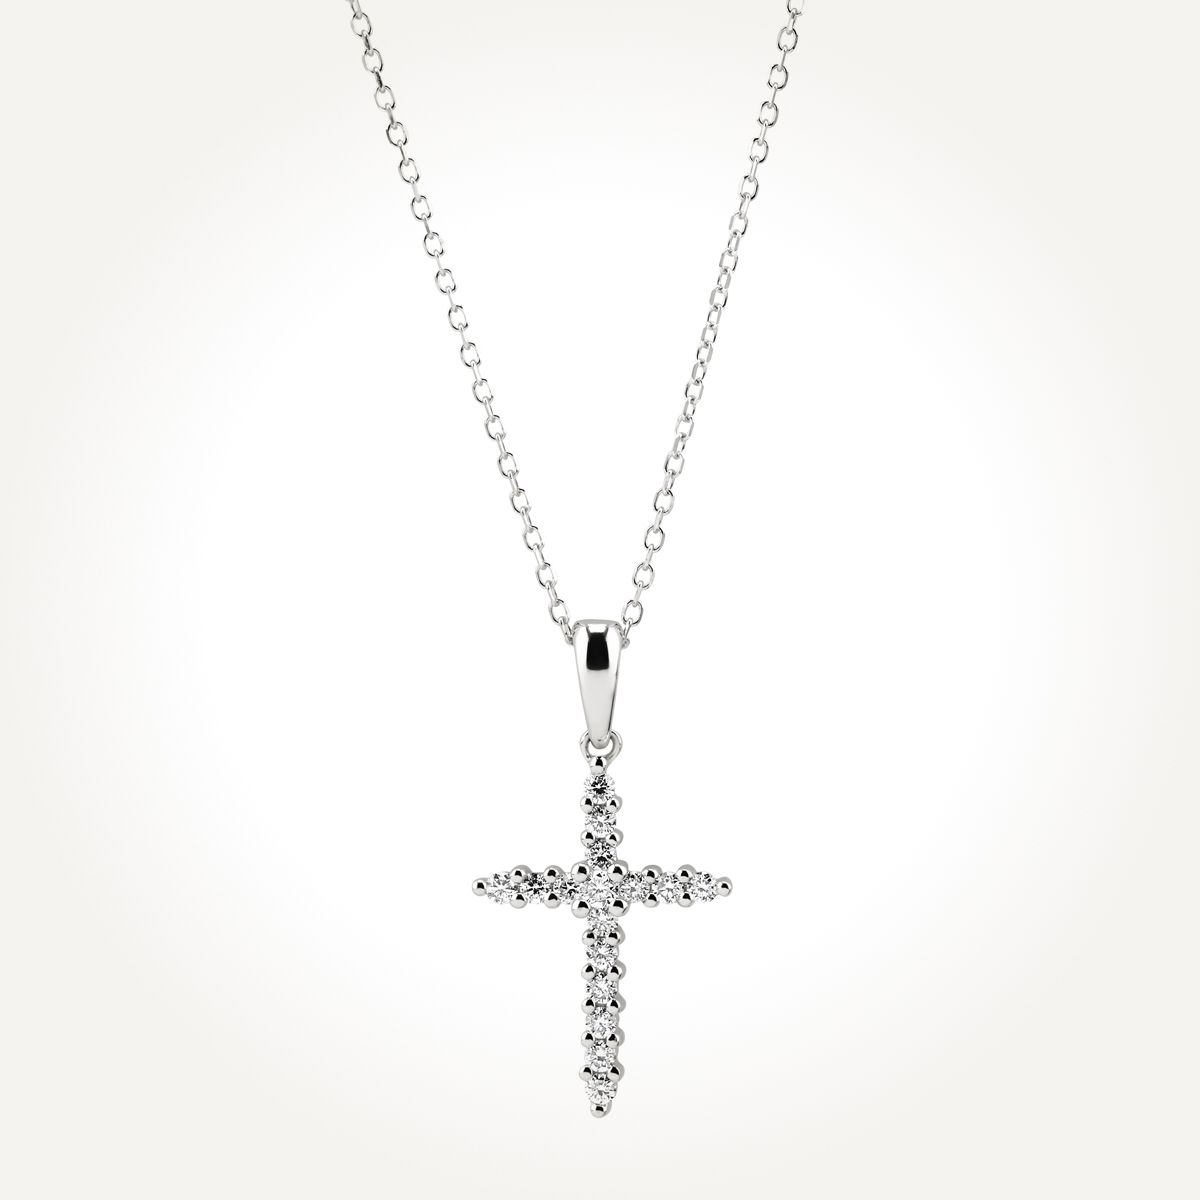 cross necklace 22k white gold 3連